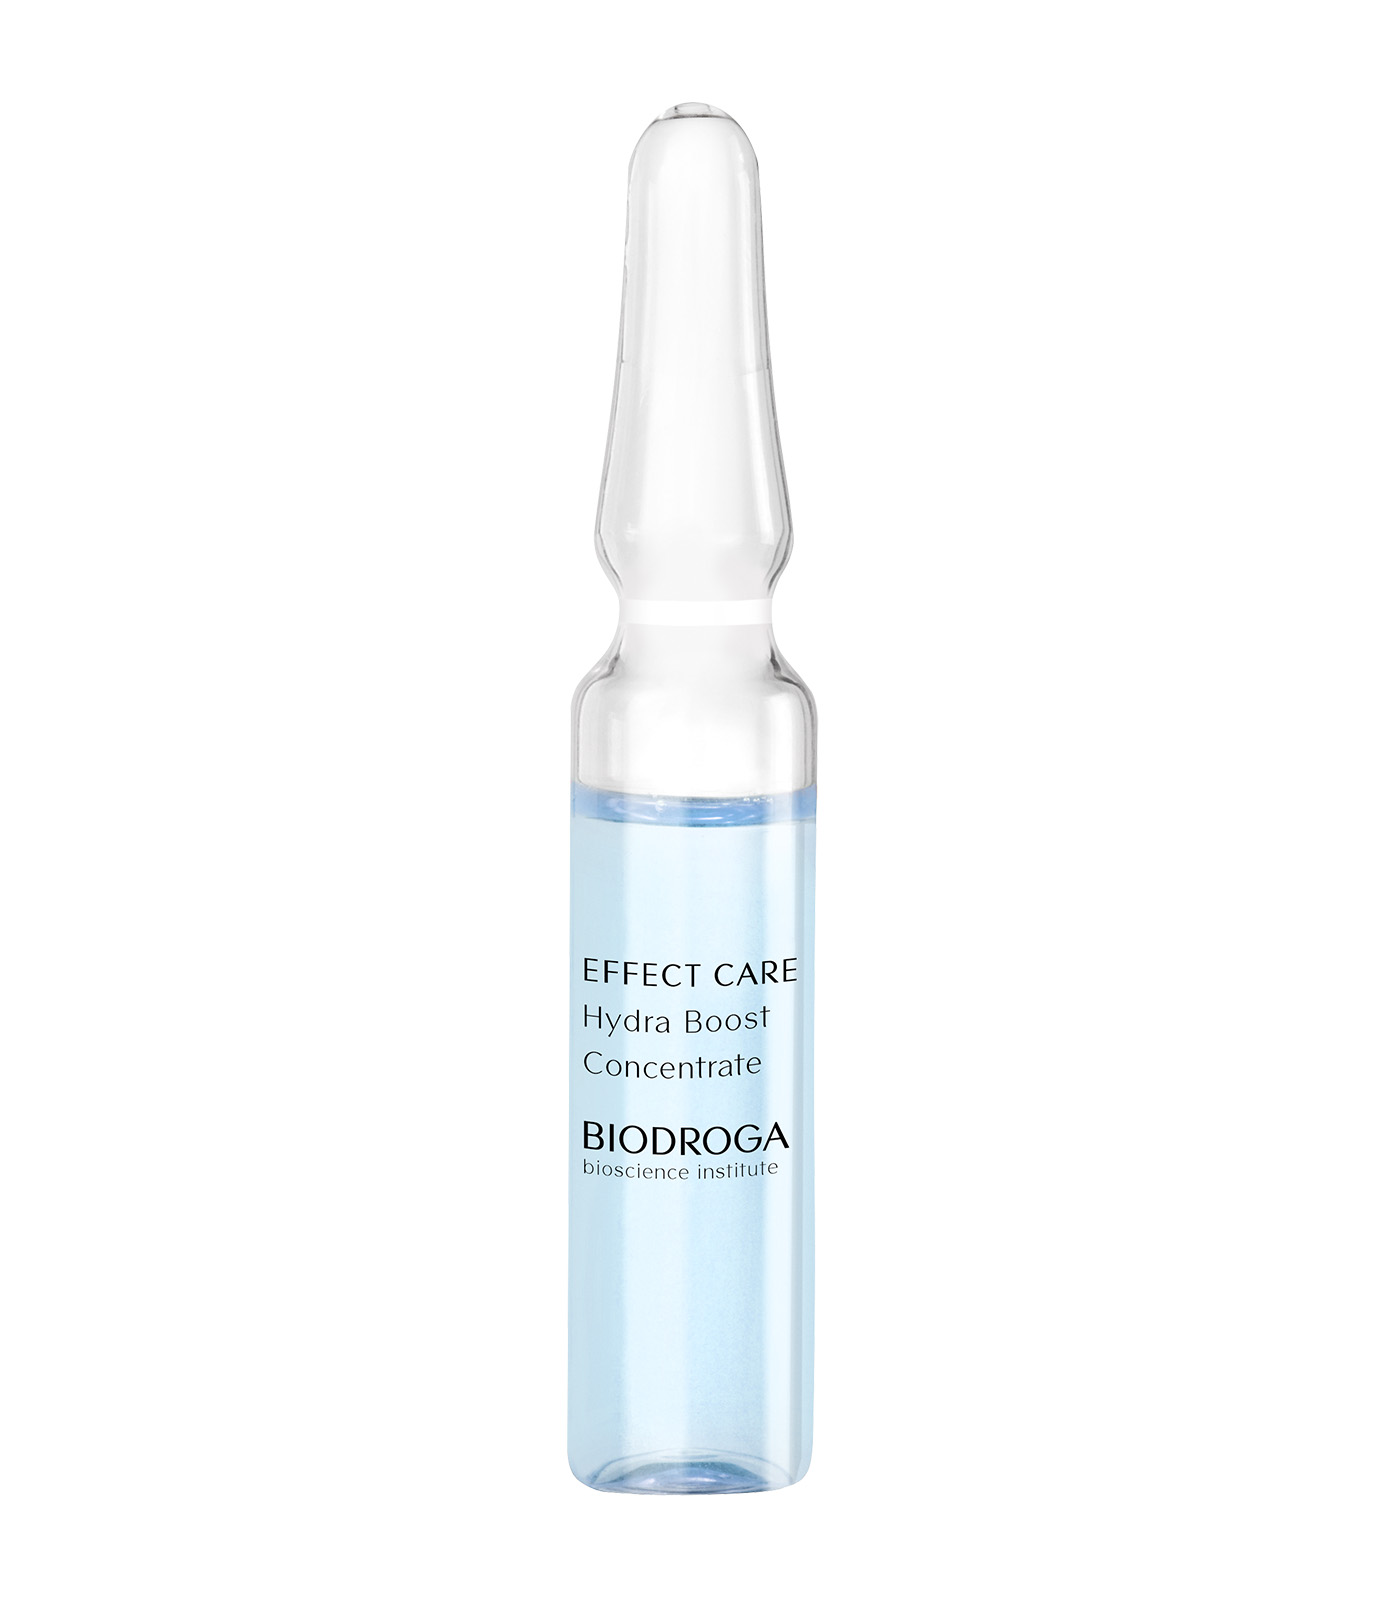 Hydra Boost Concentrate